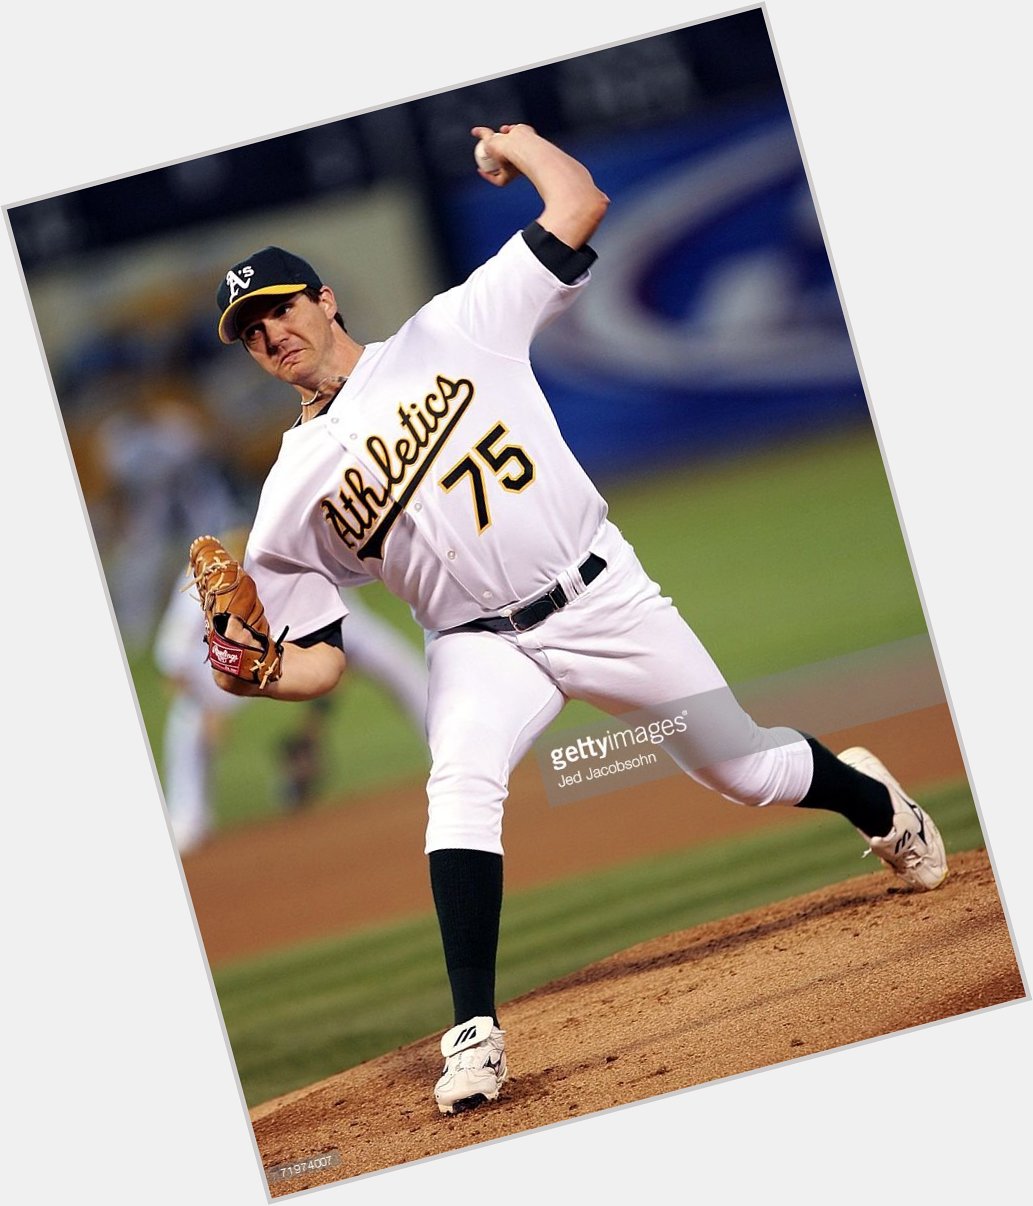 Happy Birthday to Barry Zito, who turns 39 today! 